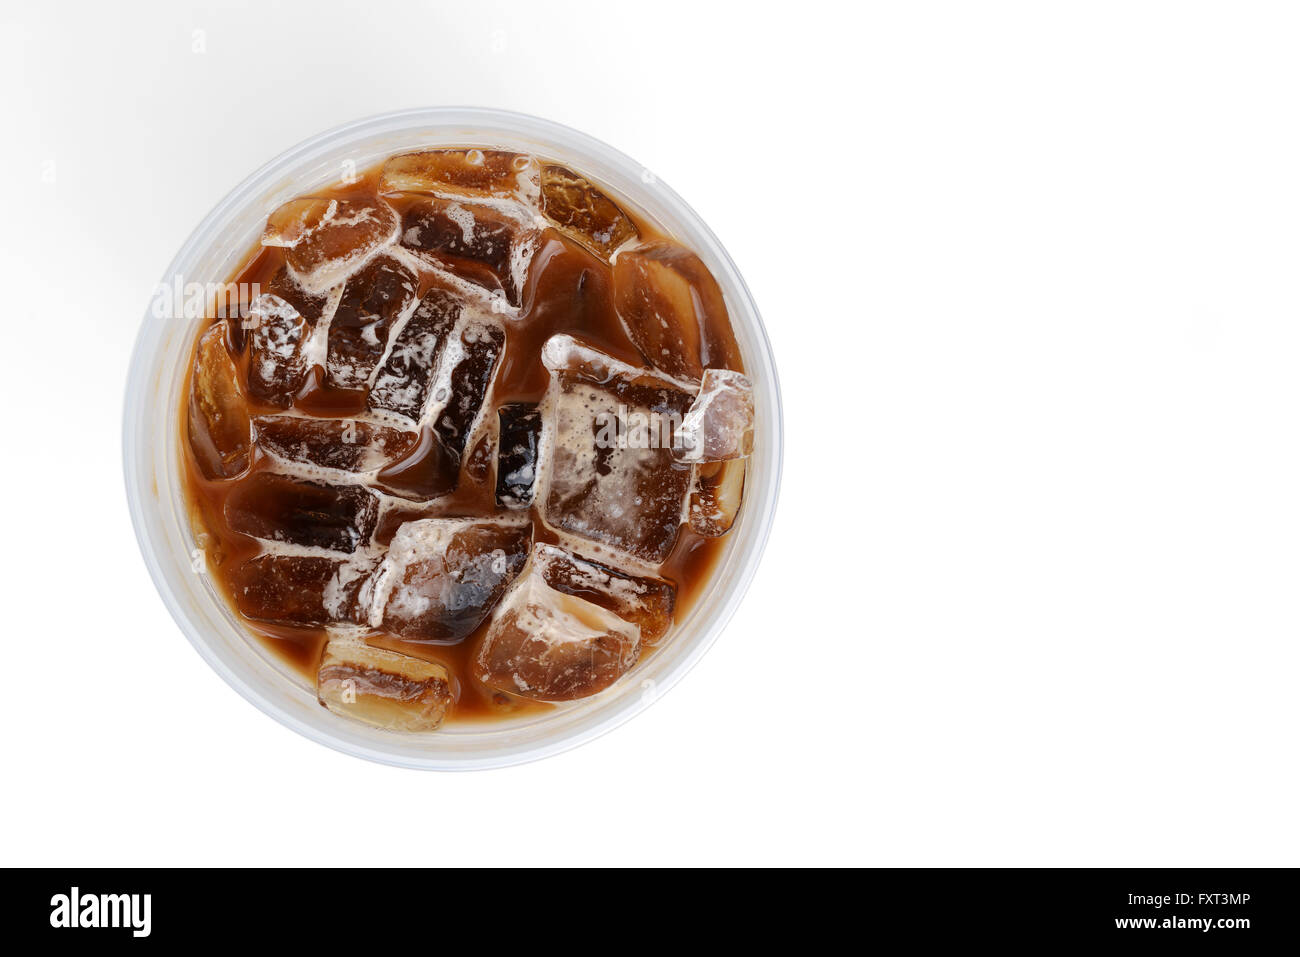 https://c8.alamy.com/comp/FXT3MP/top-view-of-iced-coffee-isolated-on-white-FXT3MP.jpg